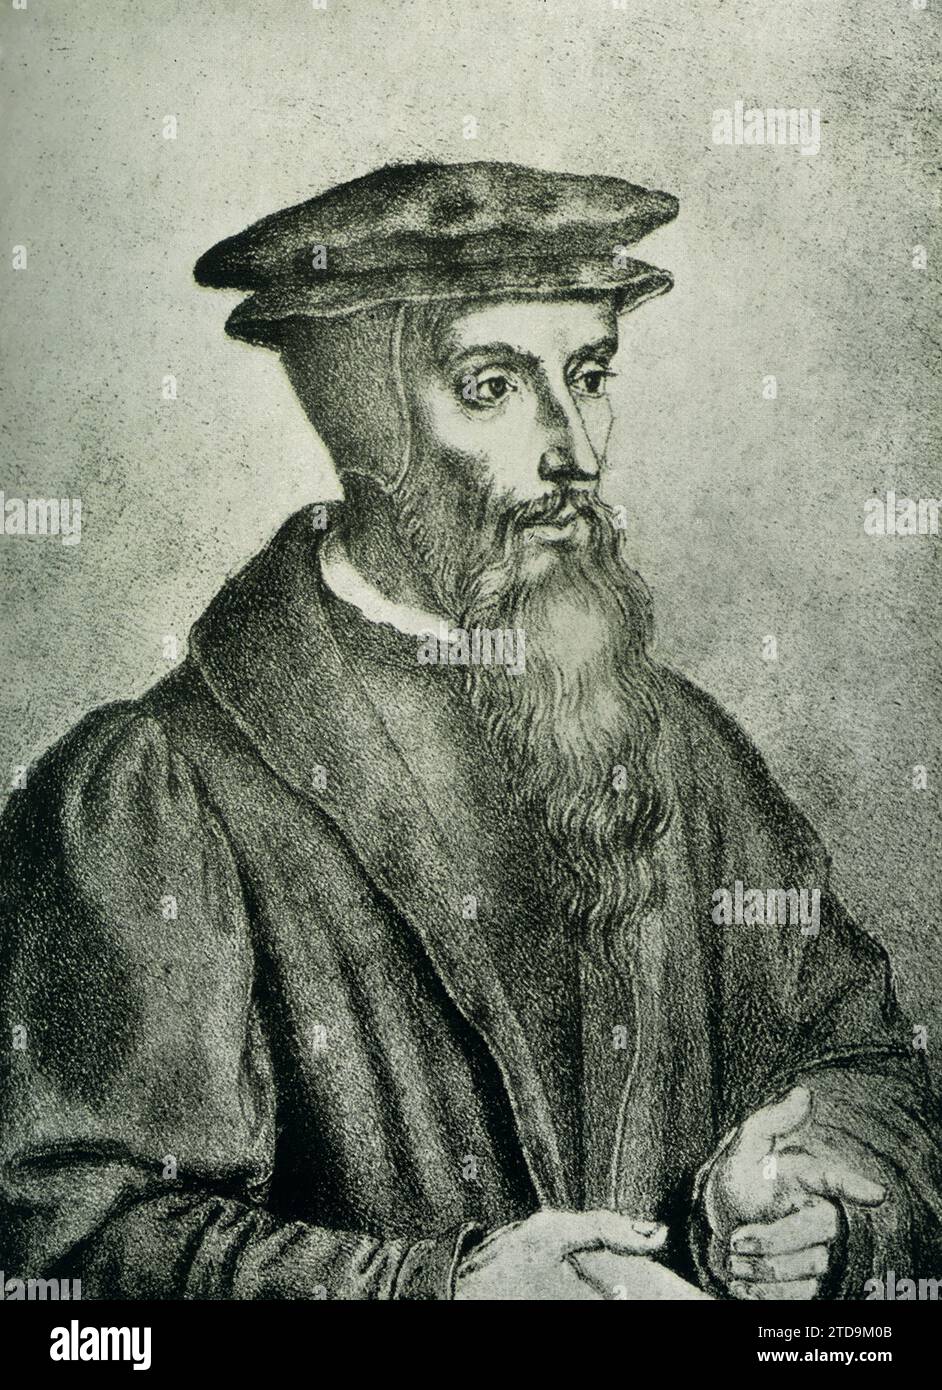 Johann [John] Calvin (1509-1564) was a French theologian during the Reformation. Calvinism, named for Calvin, is a Protestant theological system, which emphasizes the irresistibility of grace and the doctrine of predestination. Stock Photo